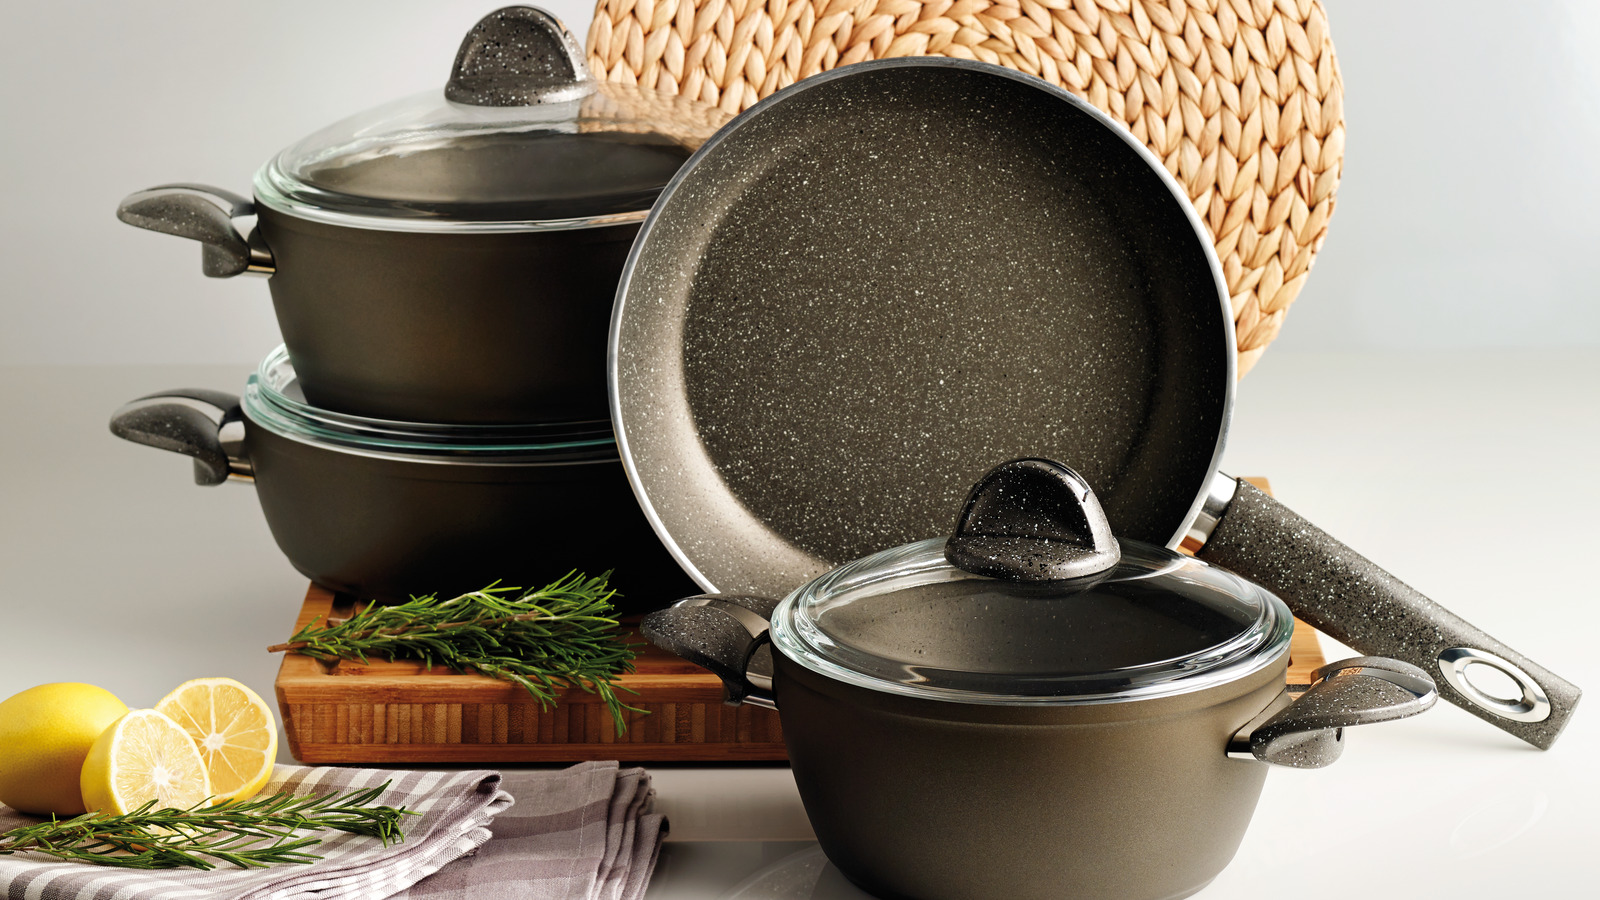 https://www.tastingtable.com/img/gallery/what-to-consider-when-choosing-between-ceramic-and-teflon-pans/l-intro-1668624058.jpg